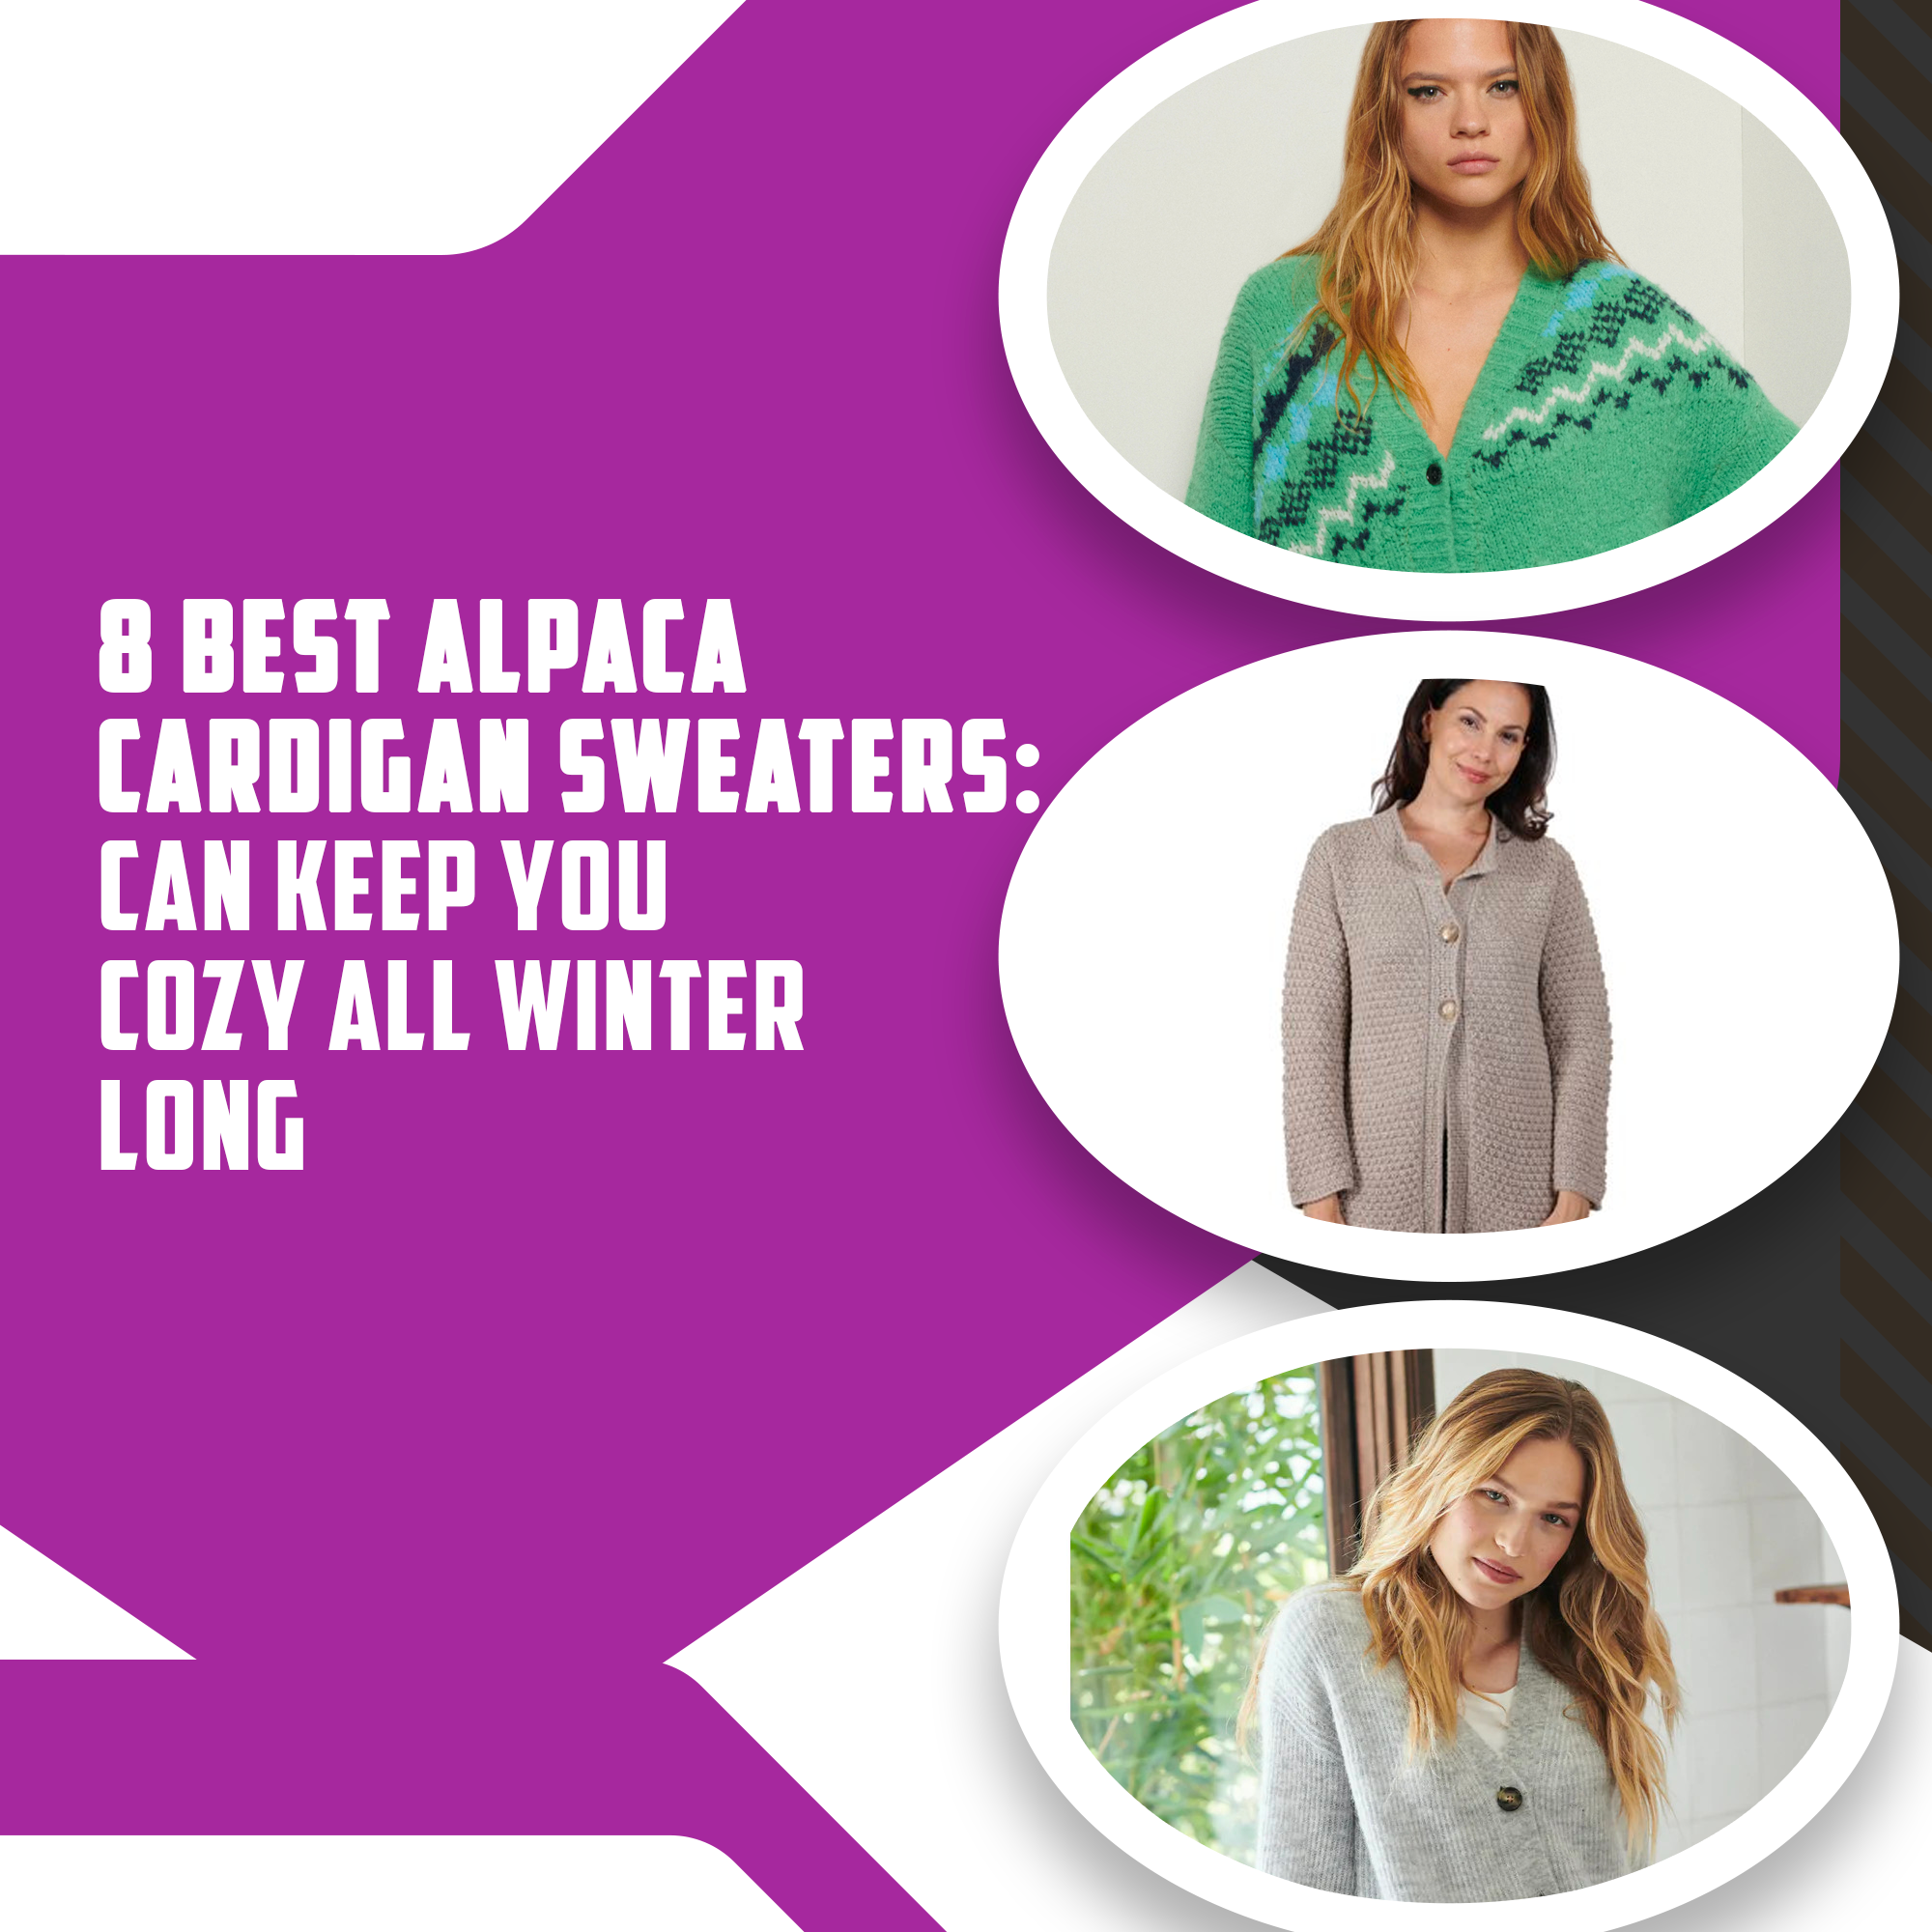 8 Best Alpaca Cardigan Sweaters: Can Keep You Cozy All Winter Long